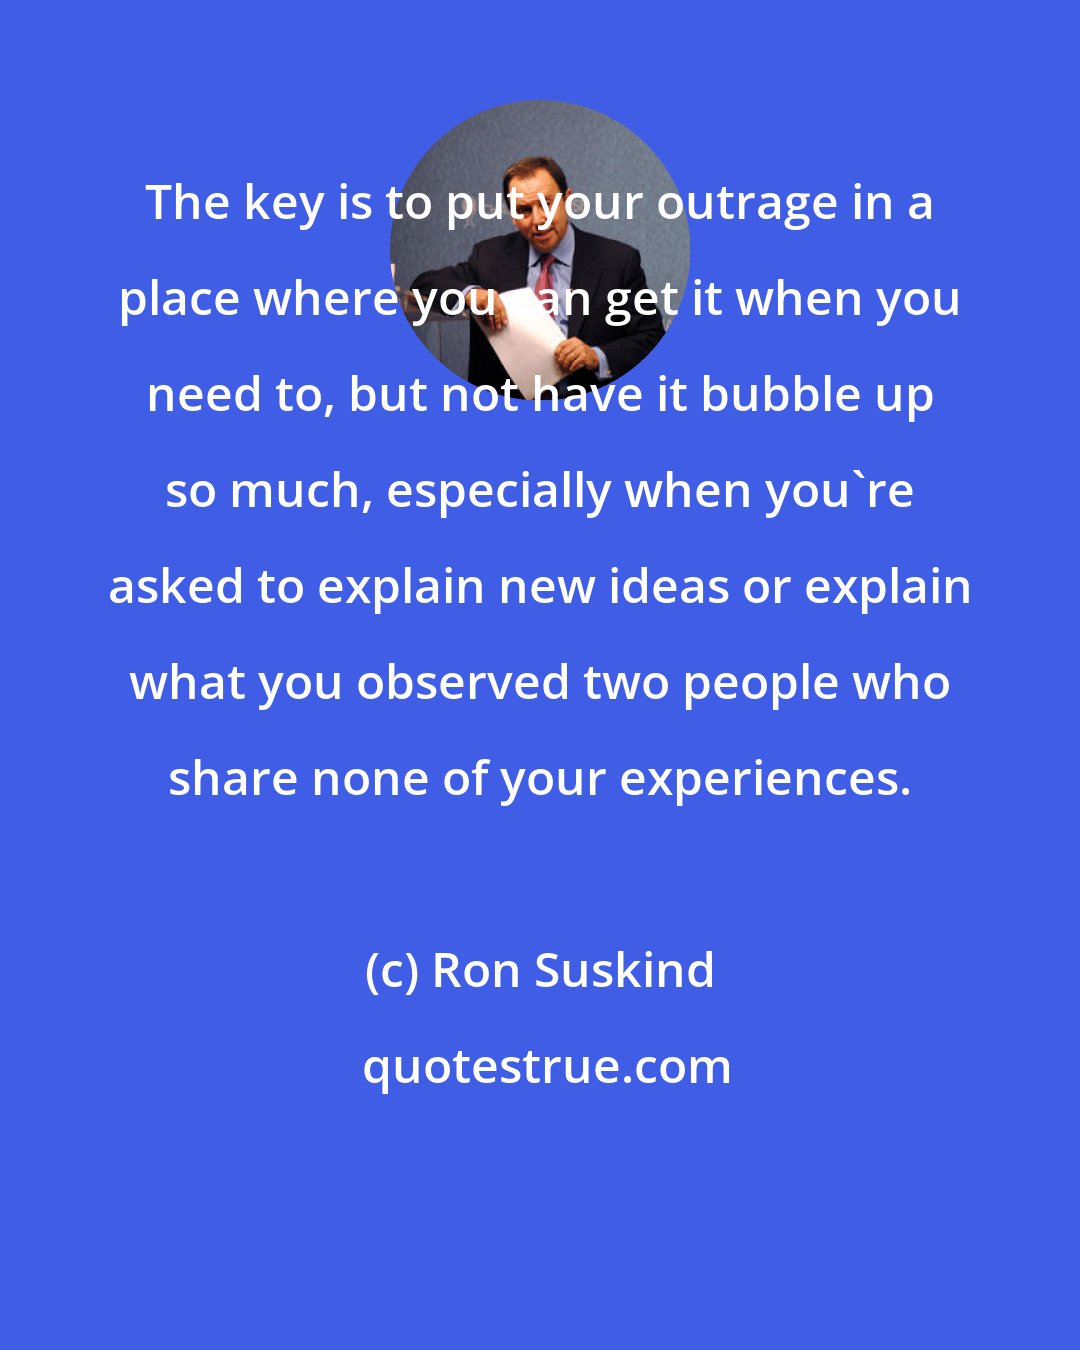 Ron Suskind: The key is to put your outrage in a place where you can get it when you need to, but not have it bubble up so much, especially when you're asked to explain new ideas or explain what you observed two people who share none of your experiences.